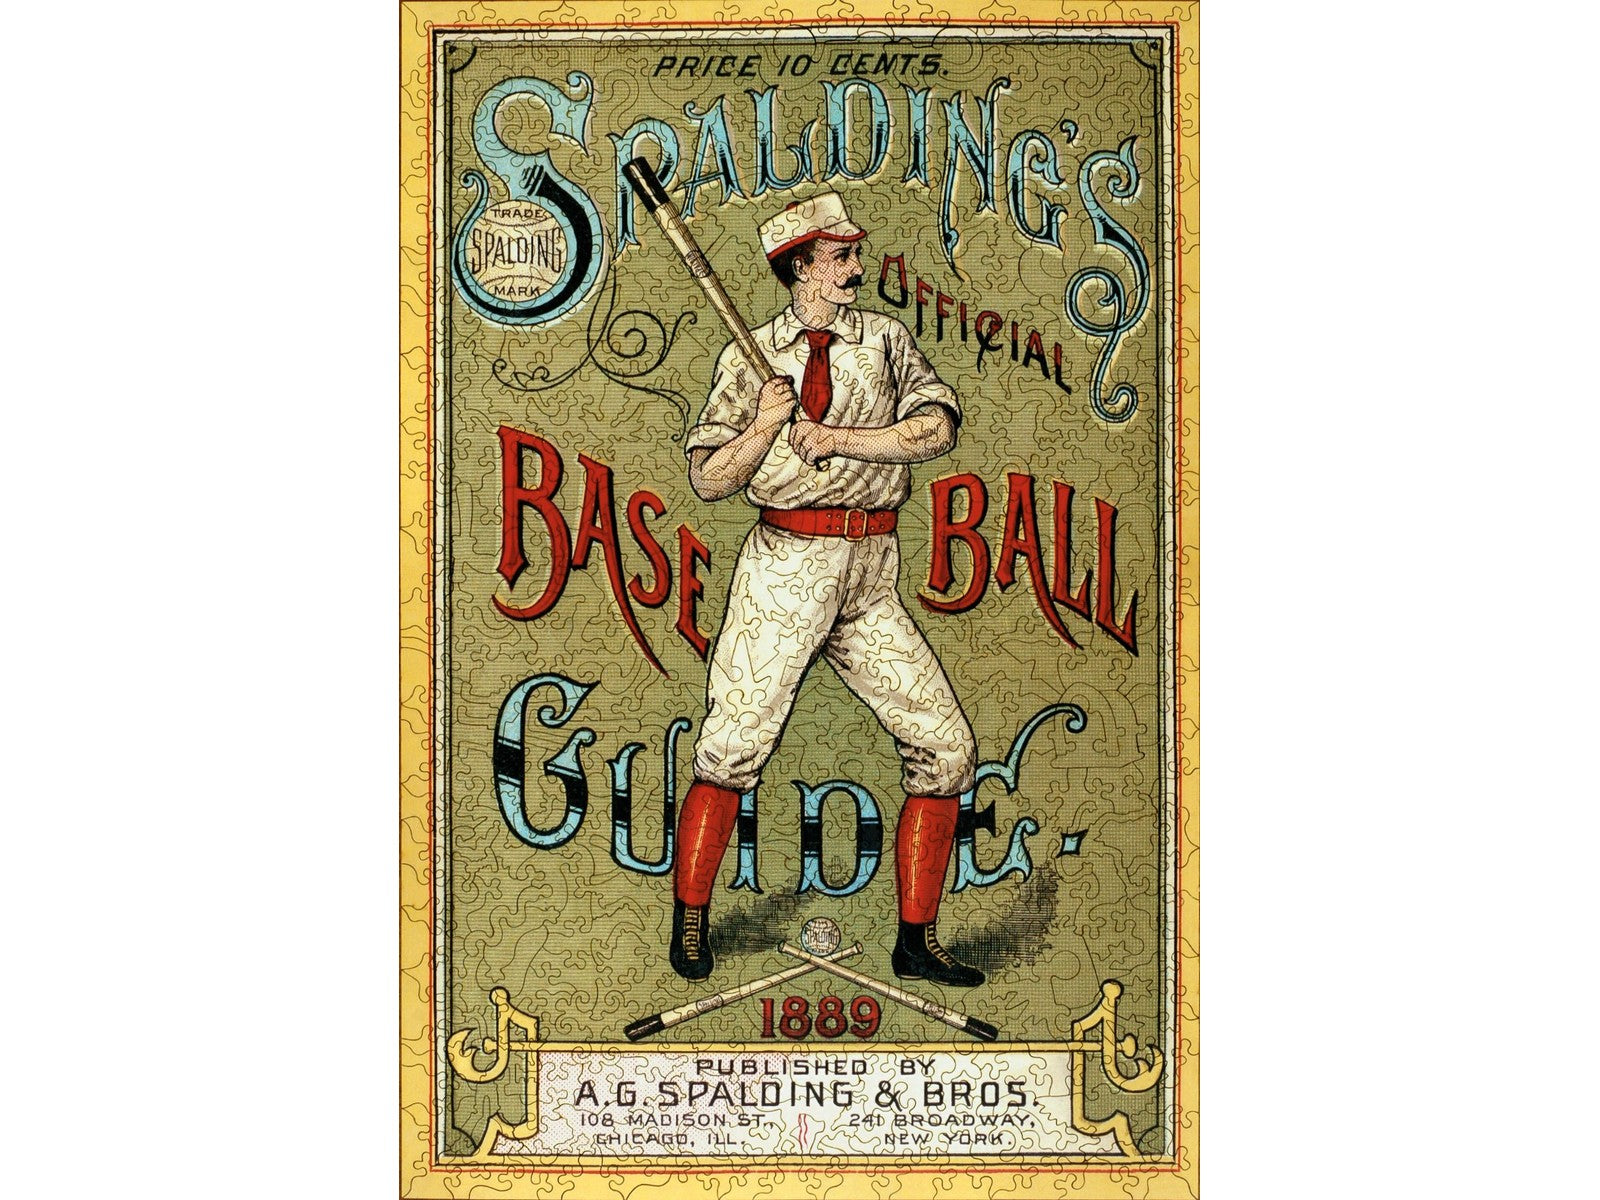 The front of the puzzle, Spalding's Baseball Guide, showing a man dressed in red and white and holding a baseball bat, surrounded by the puzzle title in decorative script.